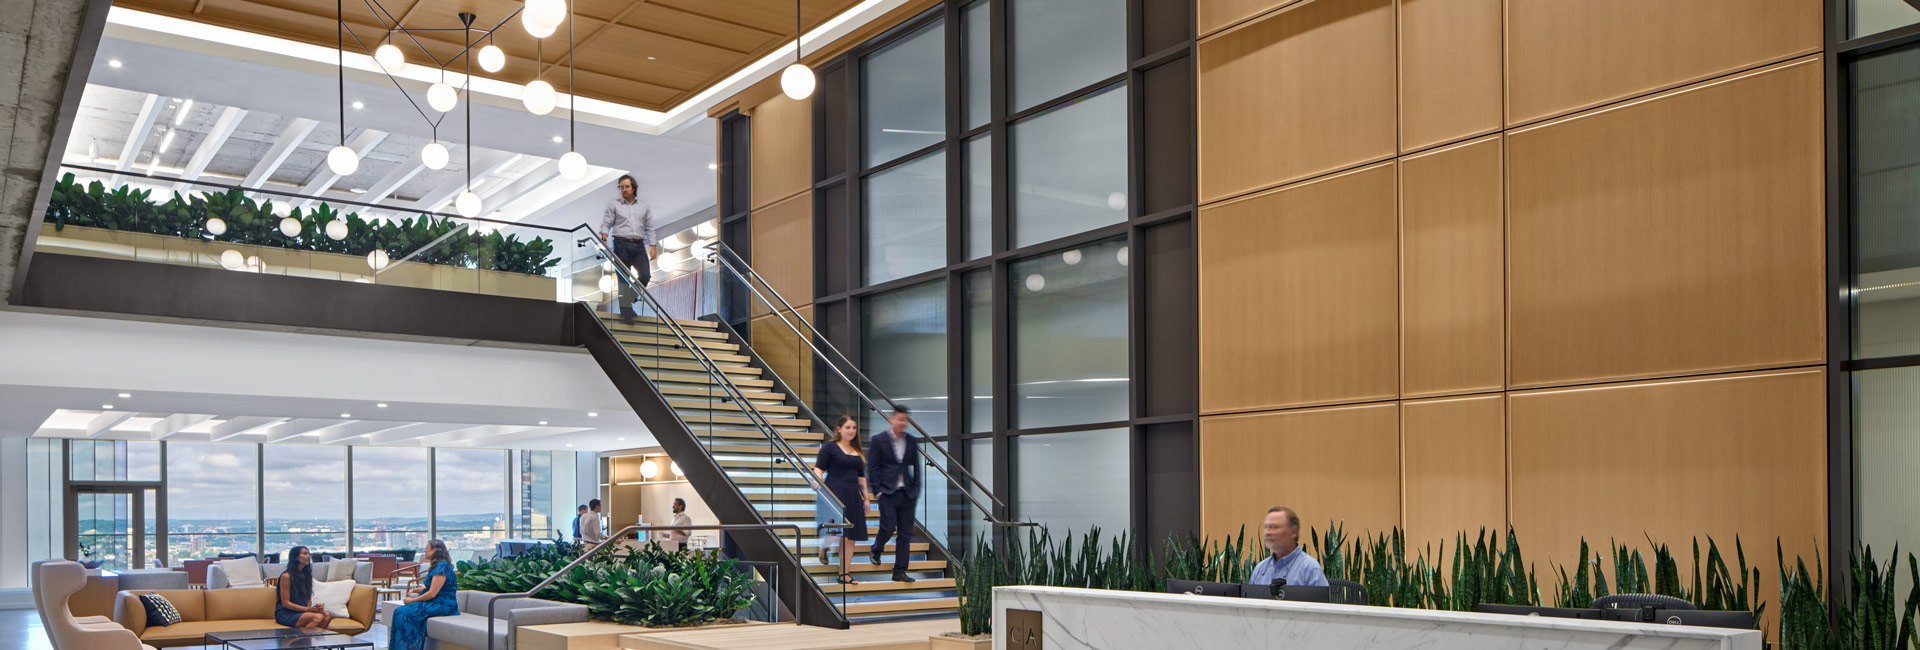 Modern lobby with staircase and large window, elegant interior with natural lighting.